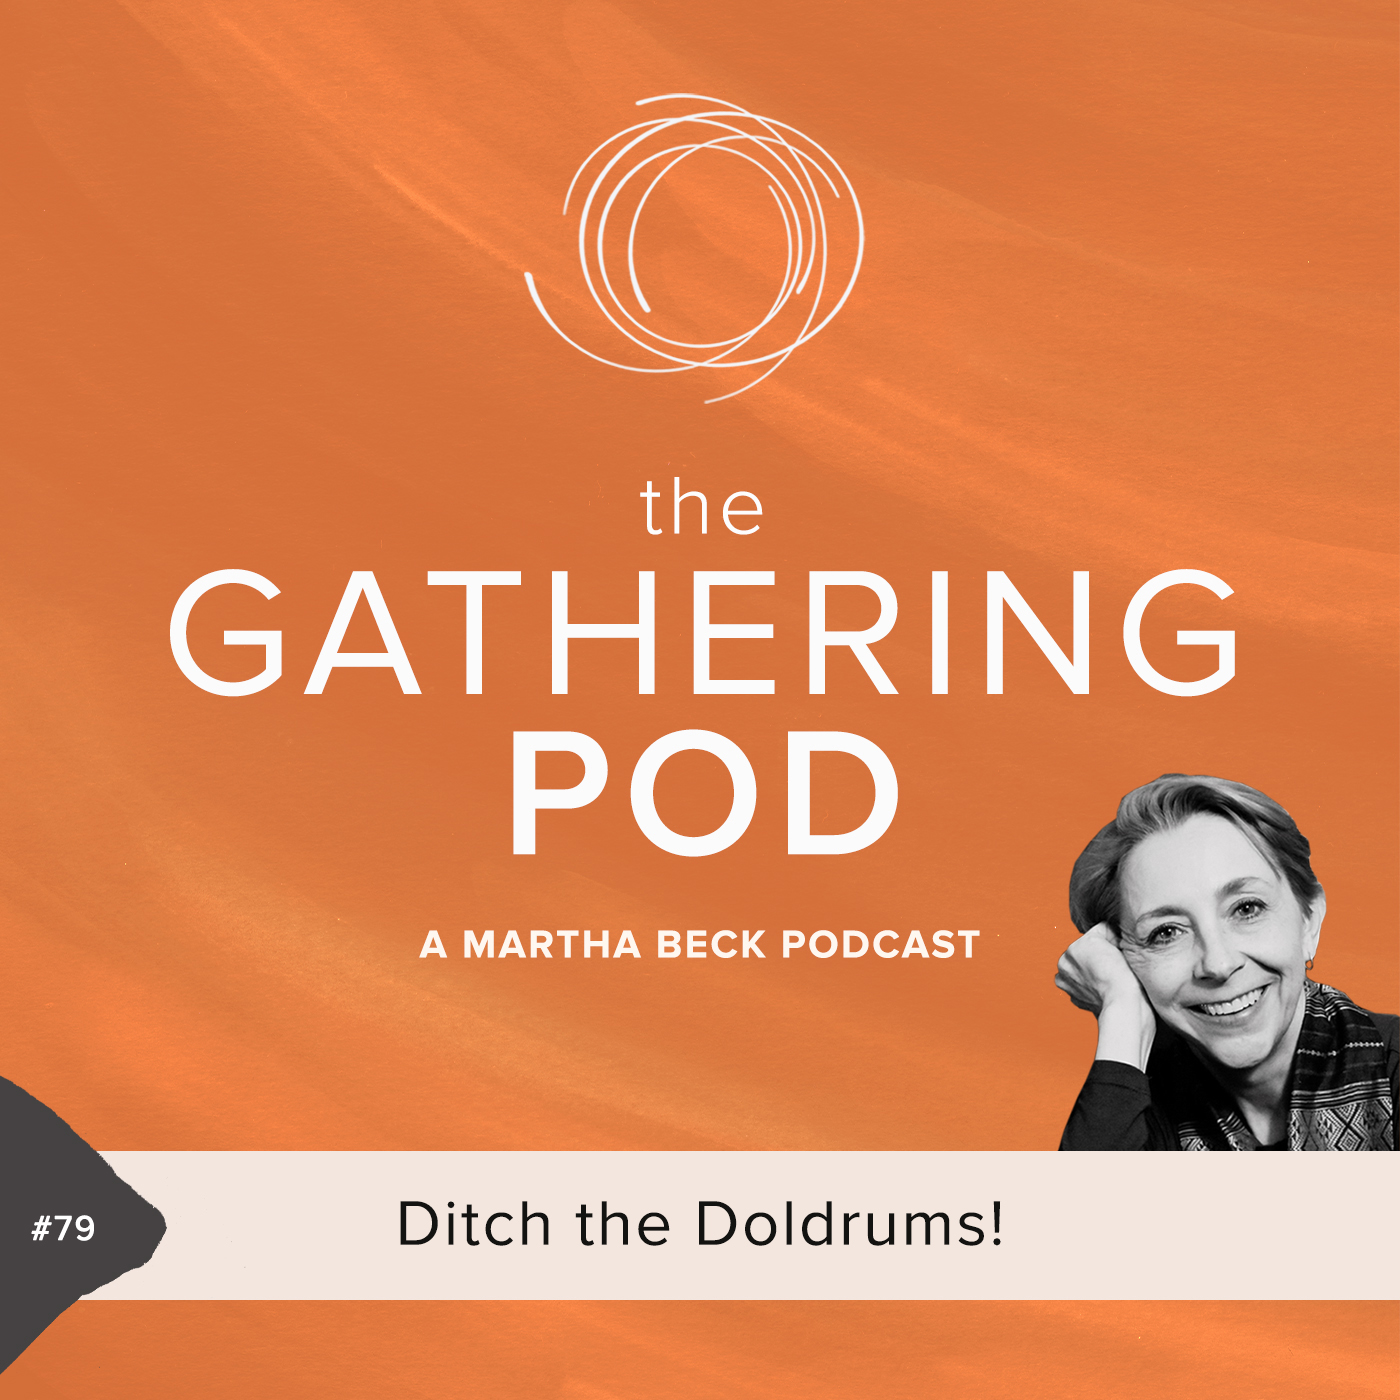 Image for The Gathering Pod A Martha Beck Podcast Episode #79 Ditch the Doldrums